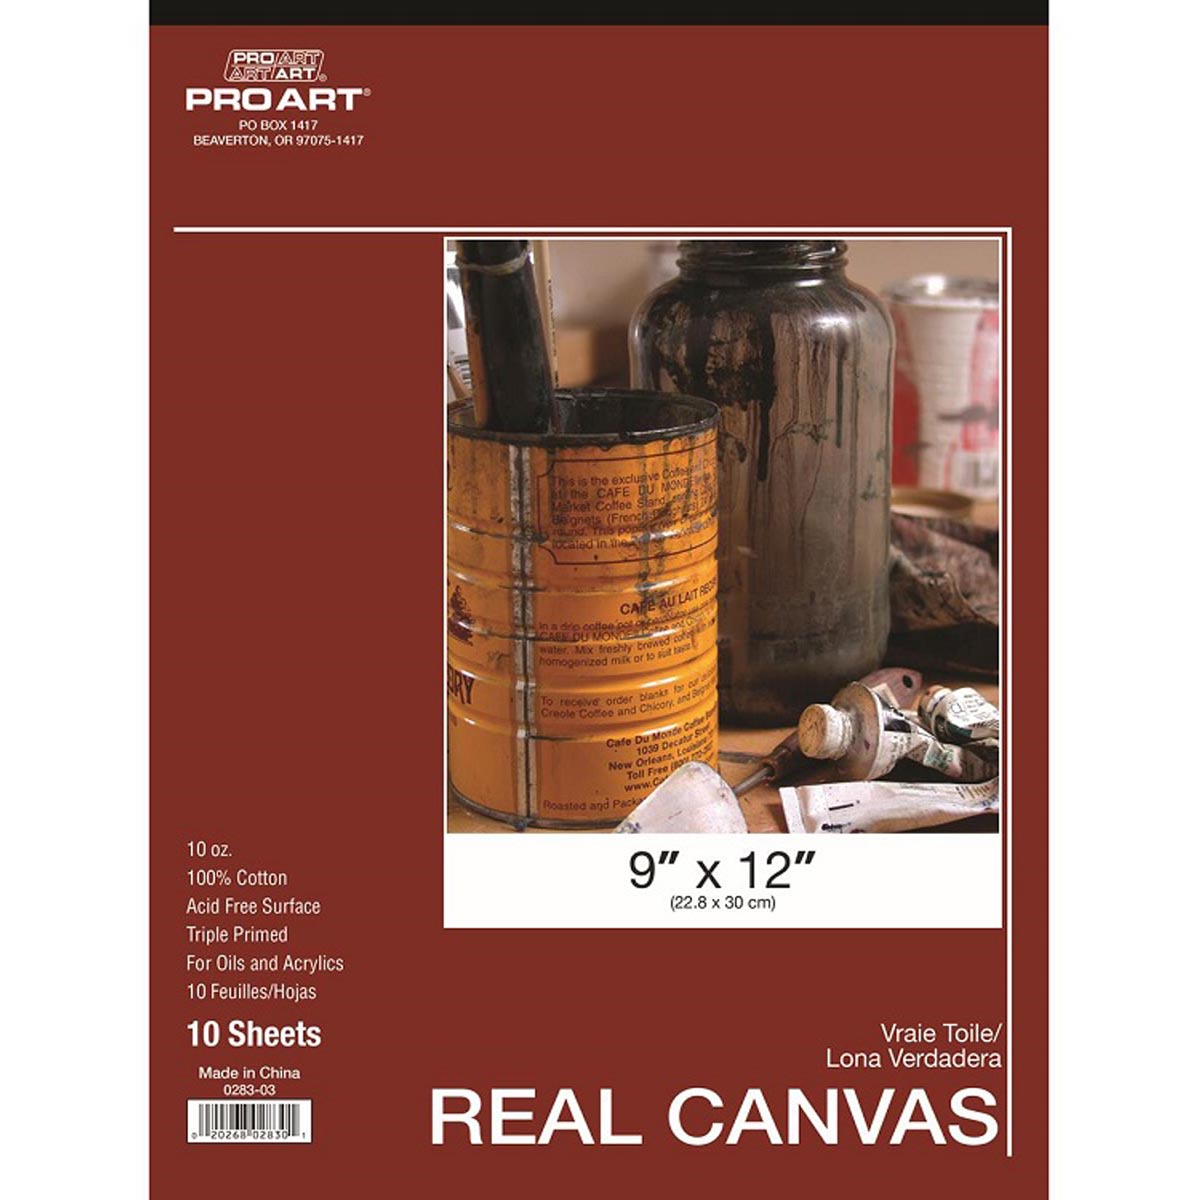 Pro Art Real Canvas Pad 10 Sheet 9 x 12-inches